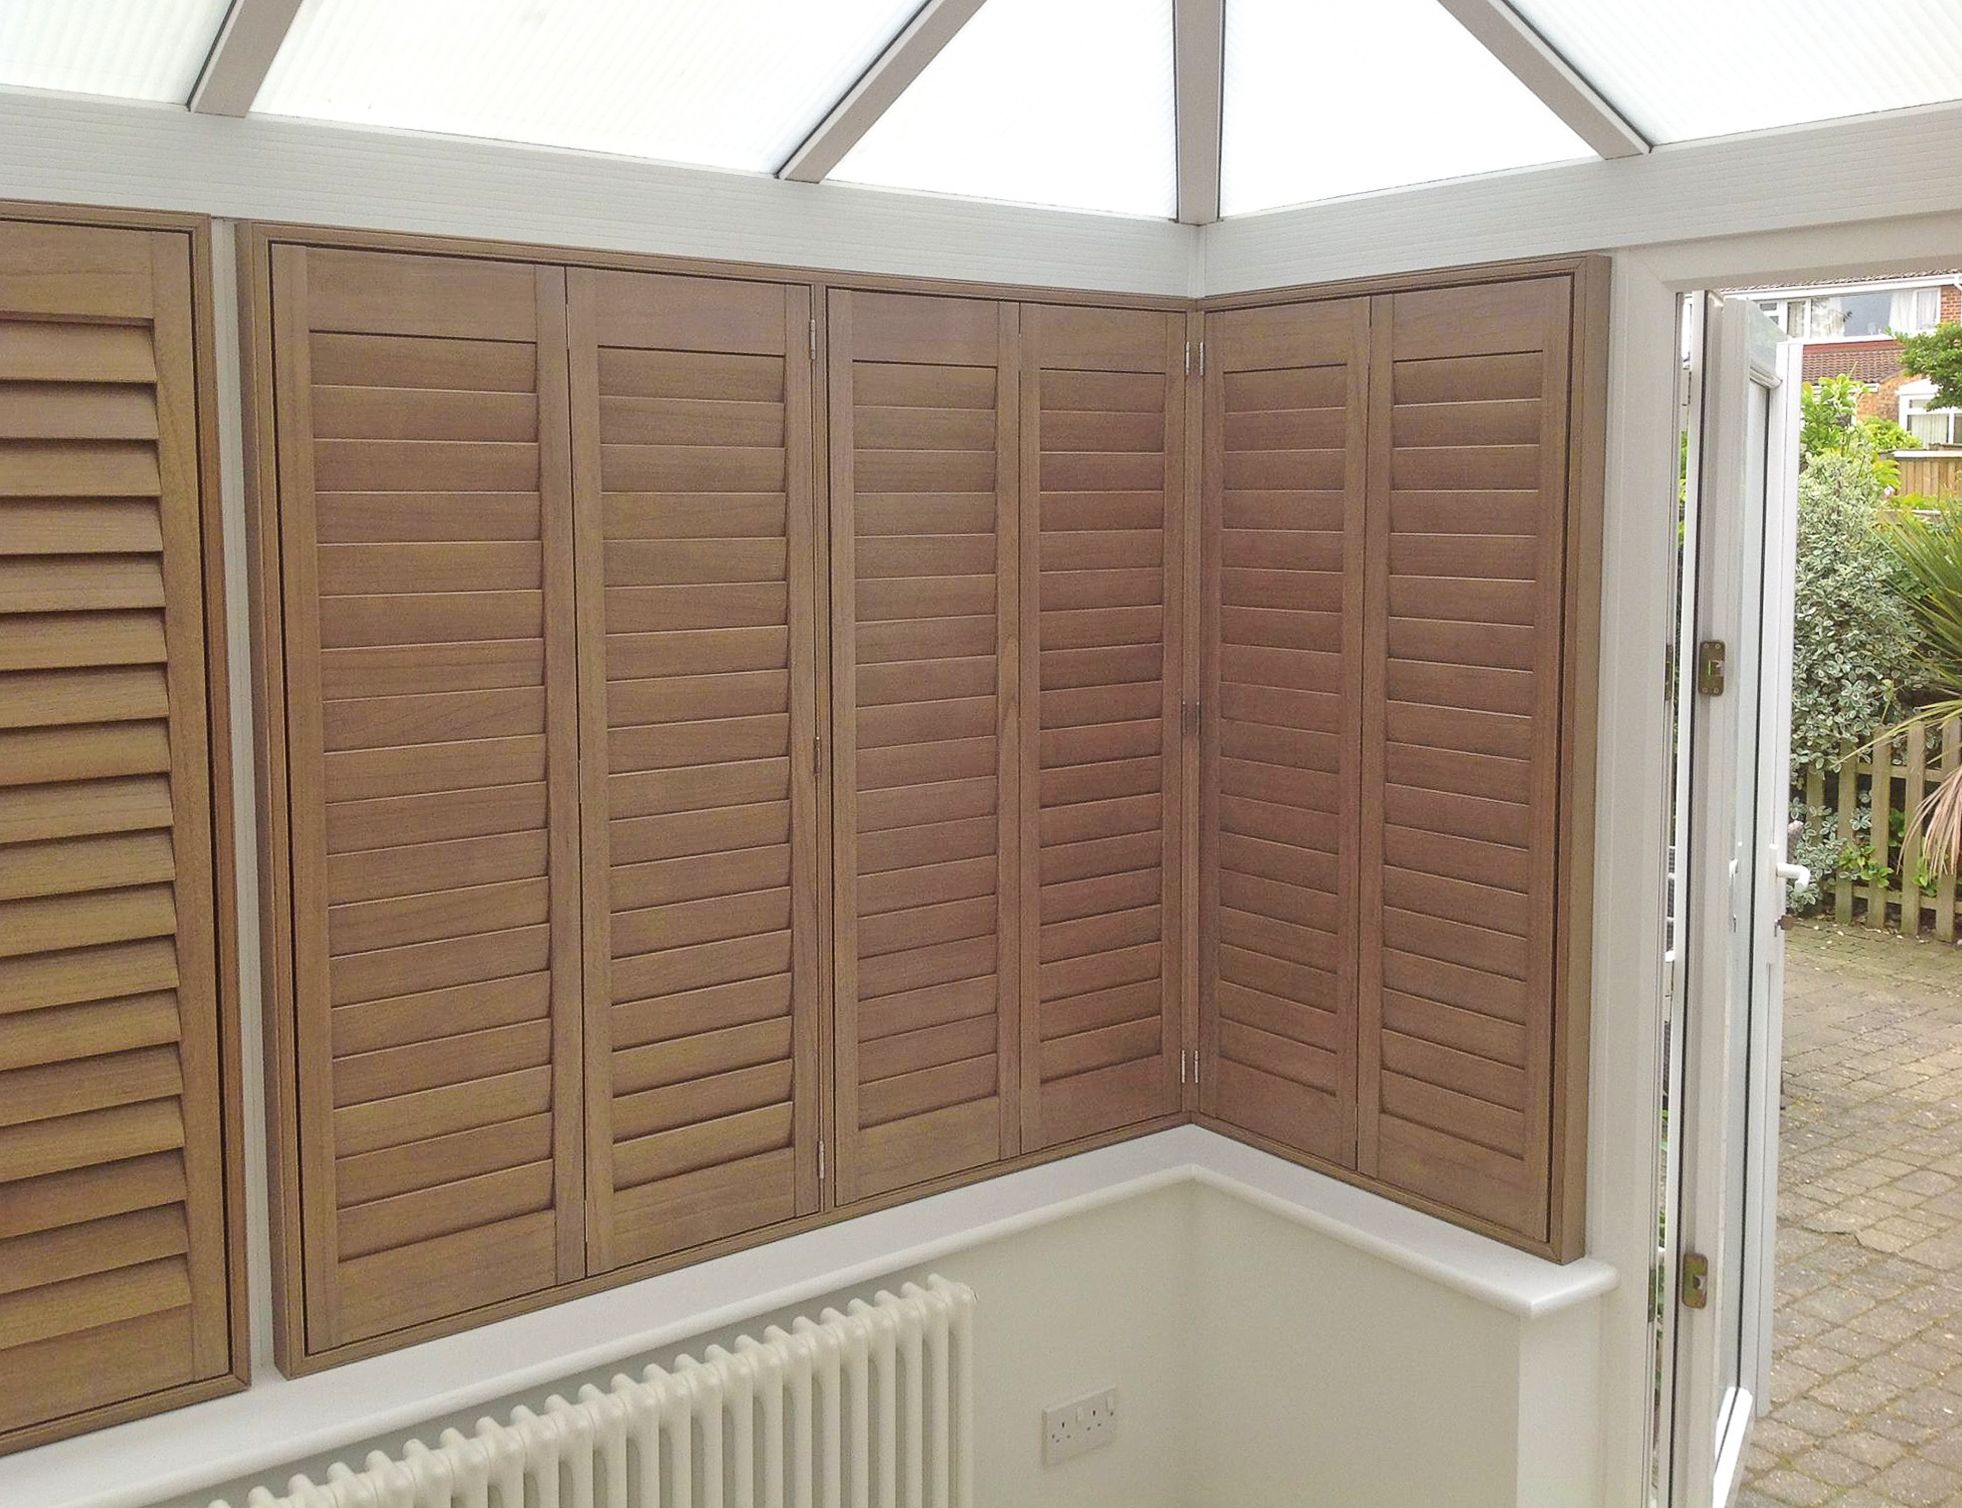 Shutters For Conservatory Enhance Your Conservatory with Stylish Window Coverings